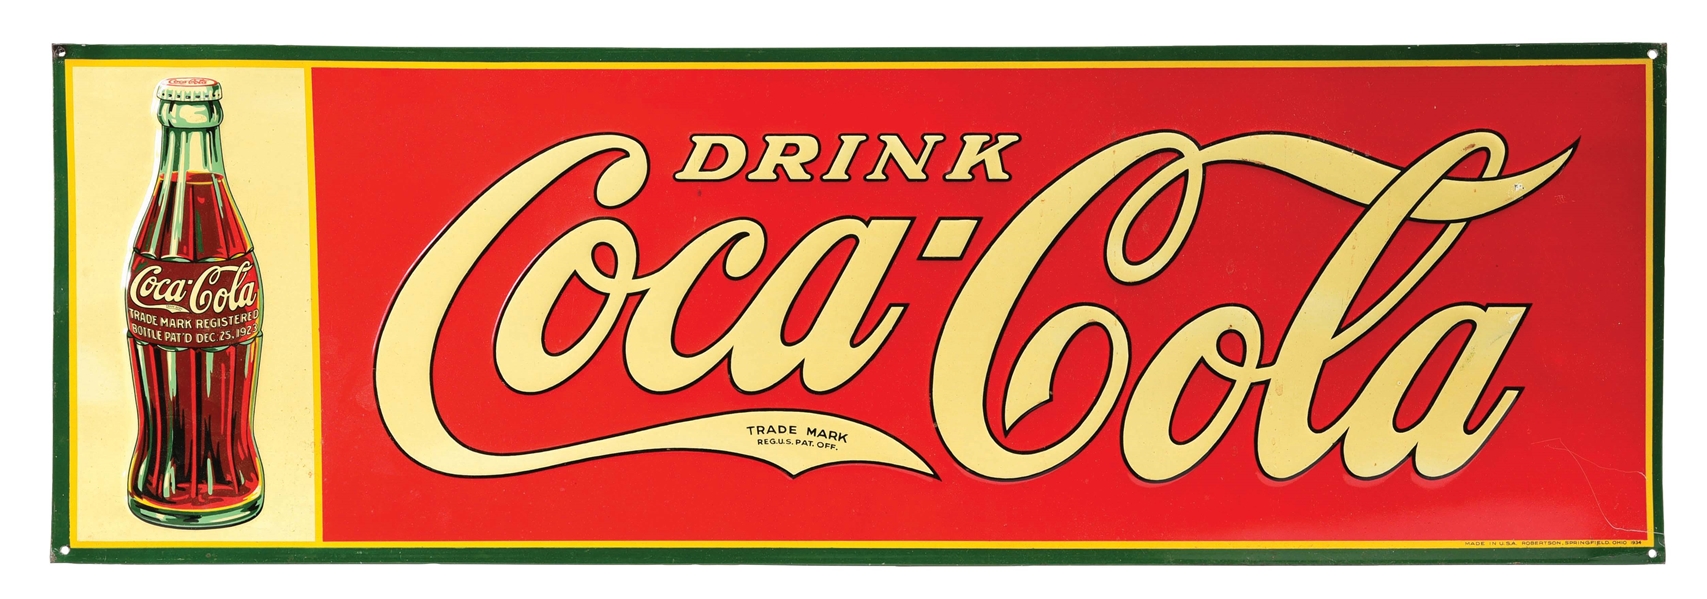 DRINK COCA-COLA EMBOSSED TIN SIGN W/ CHRISTMAS BOTTLE GRAPHIC.